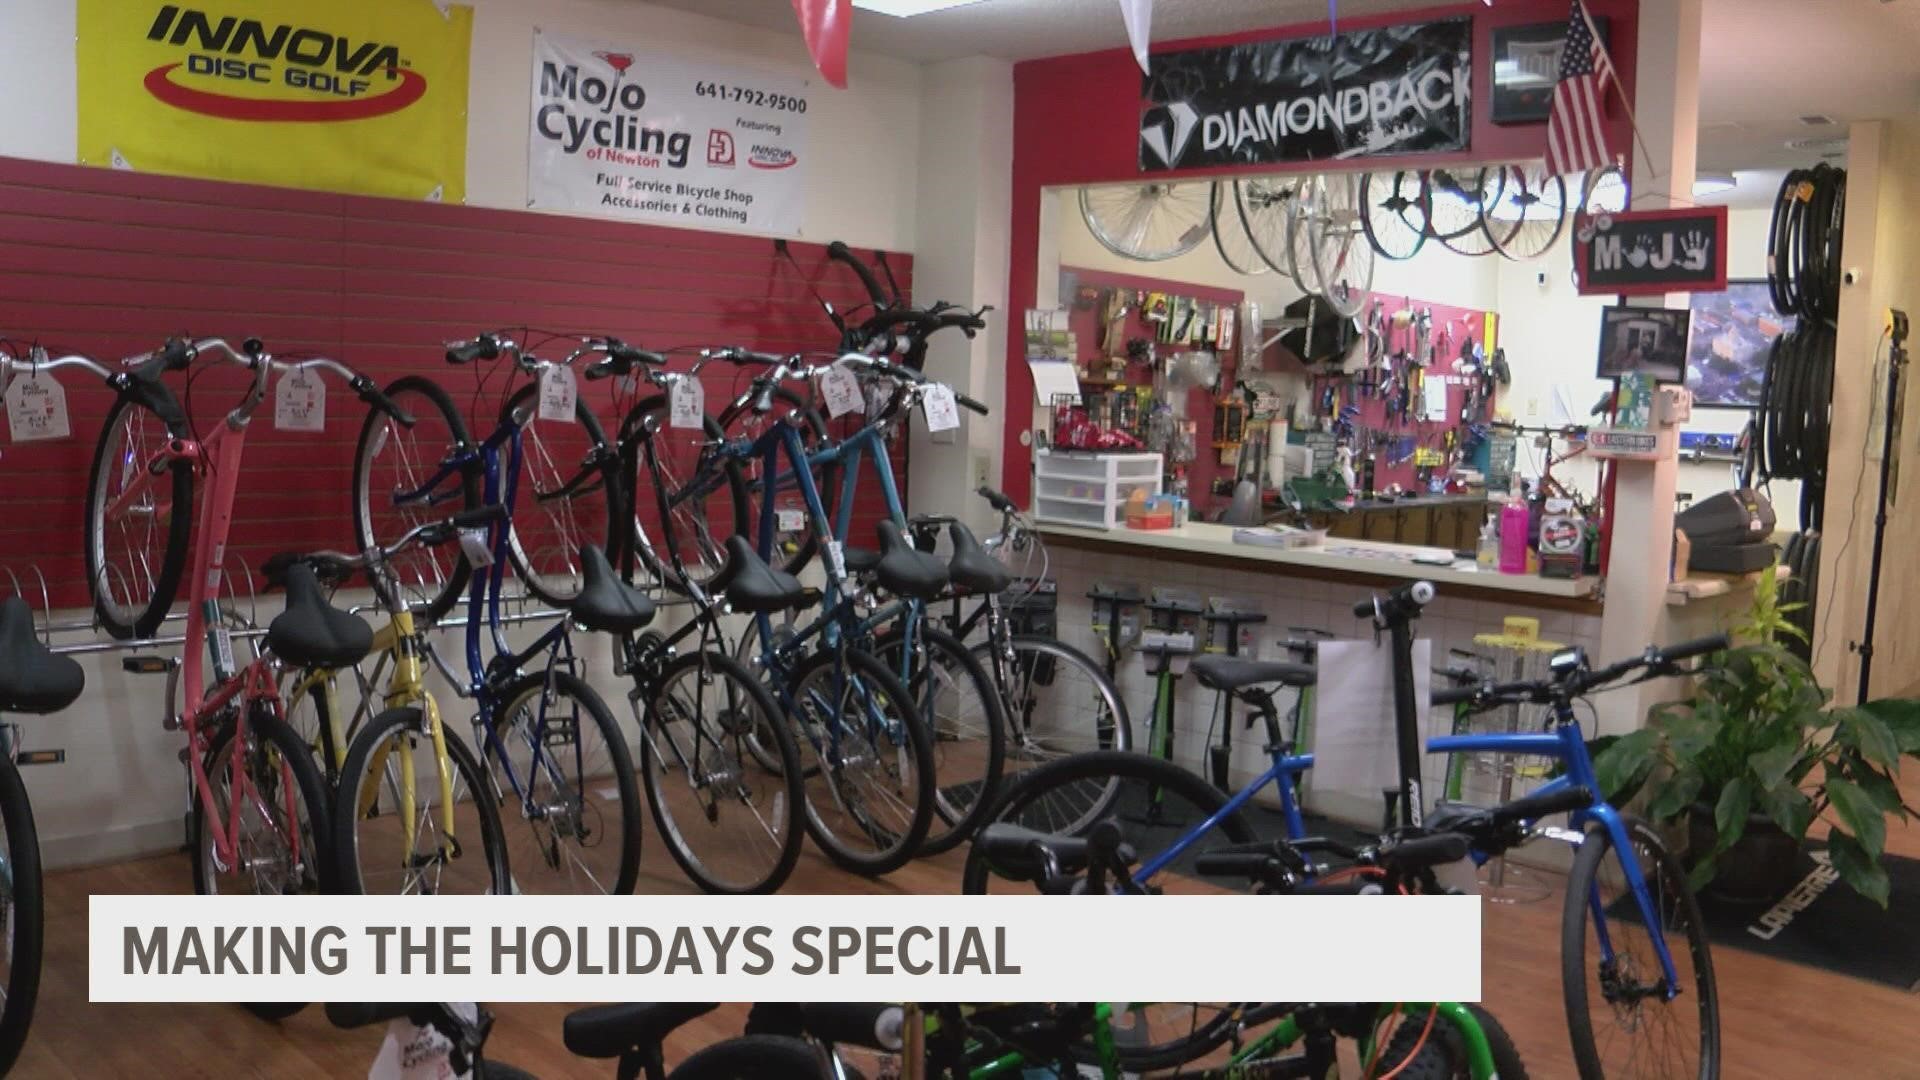 Mojo Cycling in Newton says this is more about giving back to the community than it is about the shop.